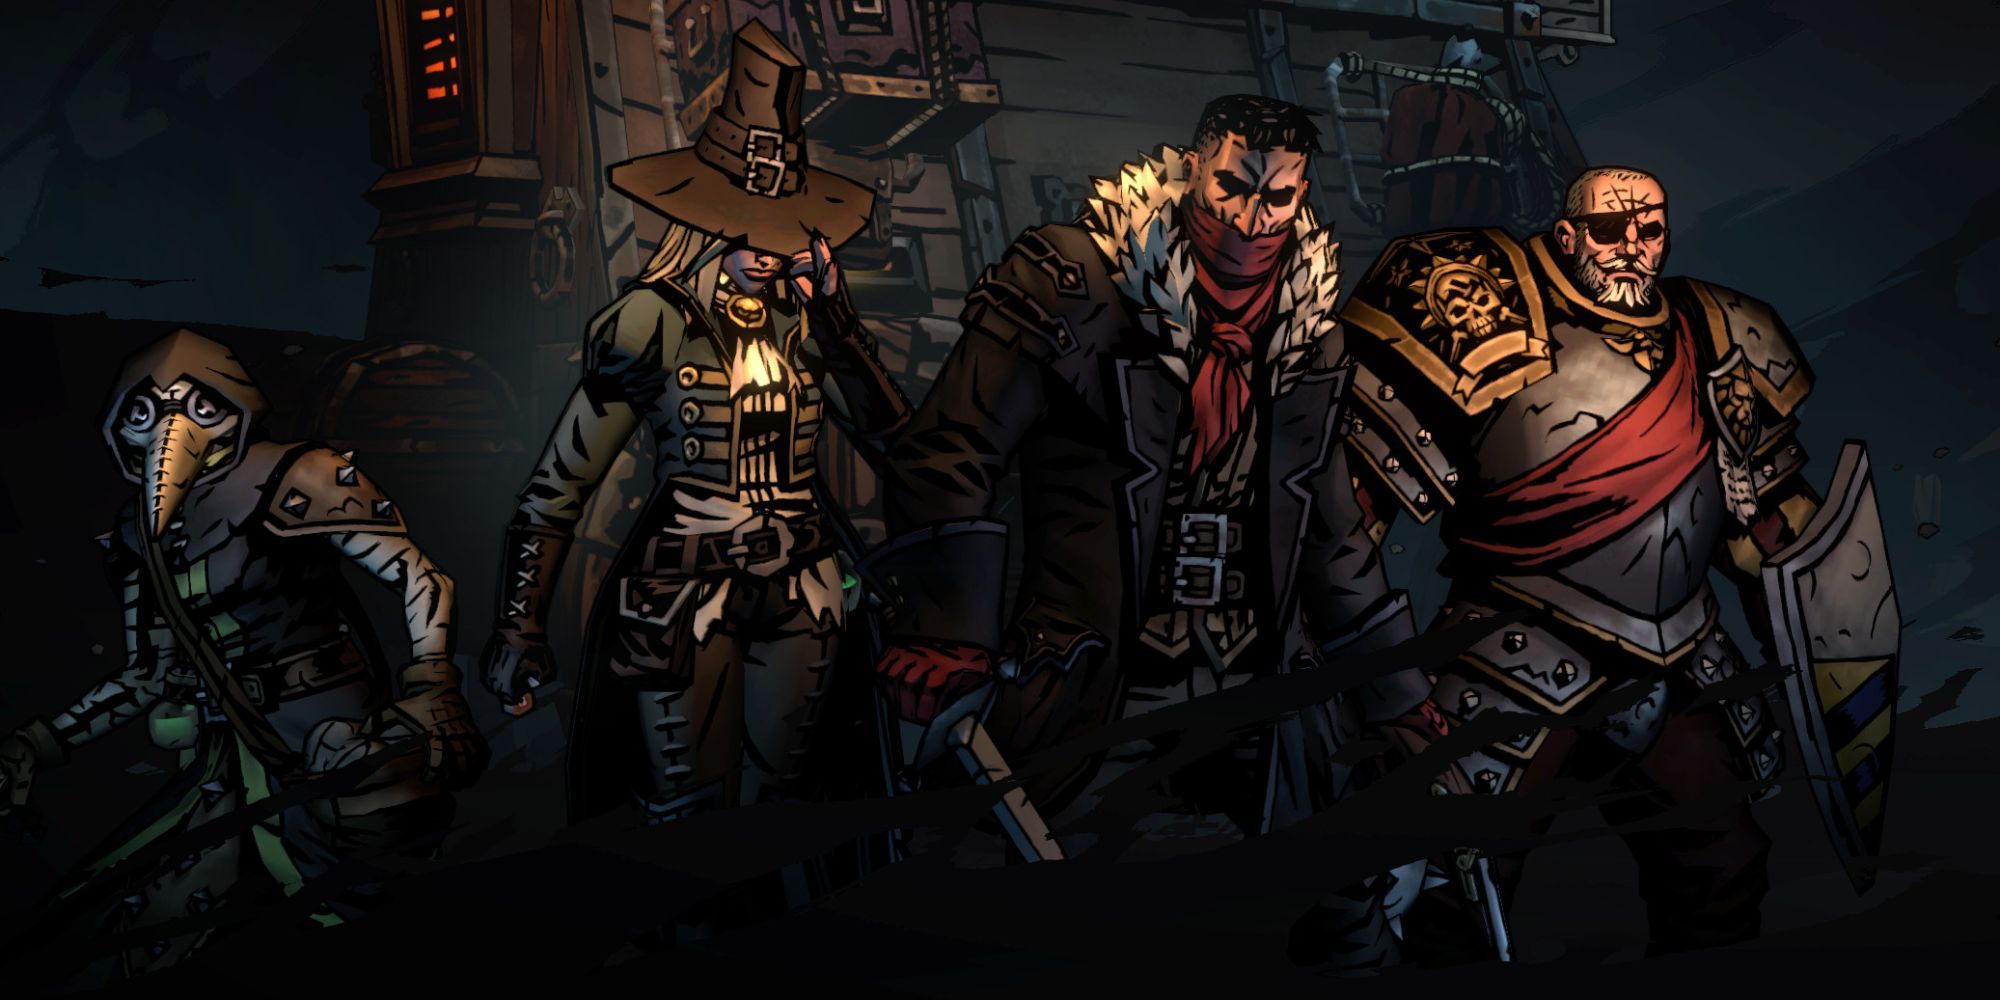 darkest dungeon 2 plague doctor grave robber gunman and bandit all standing by cart